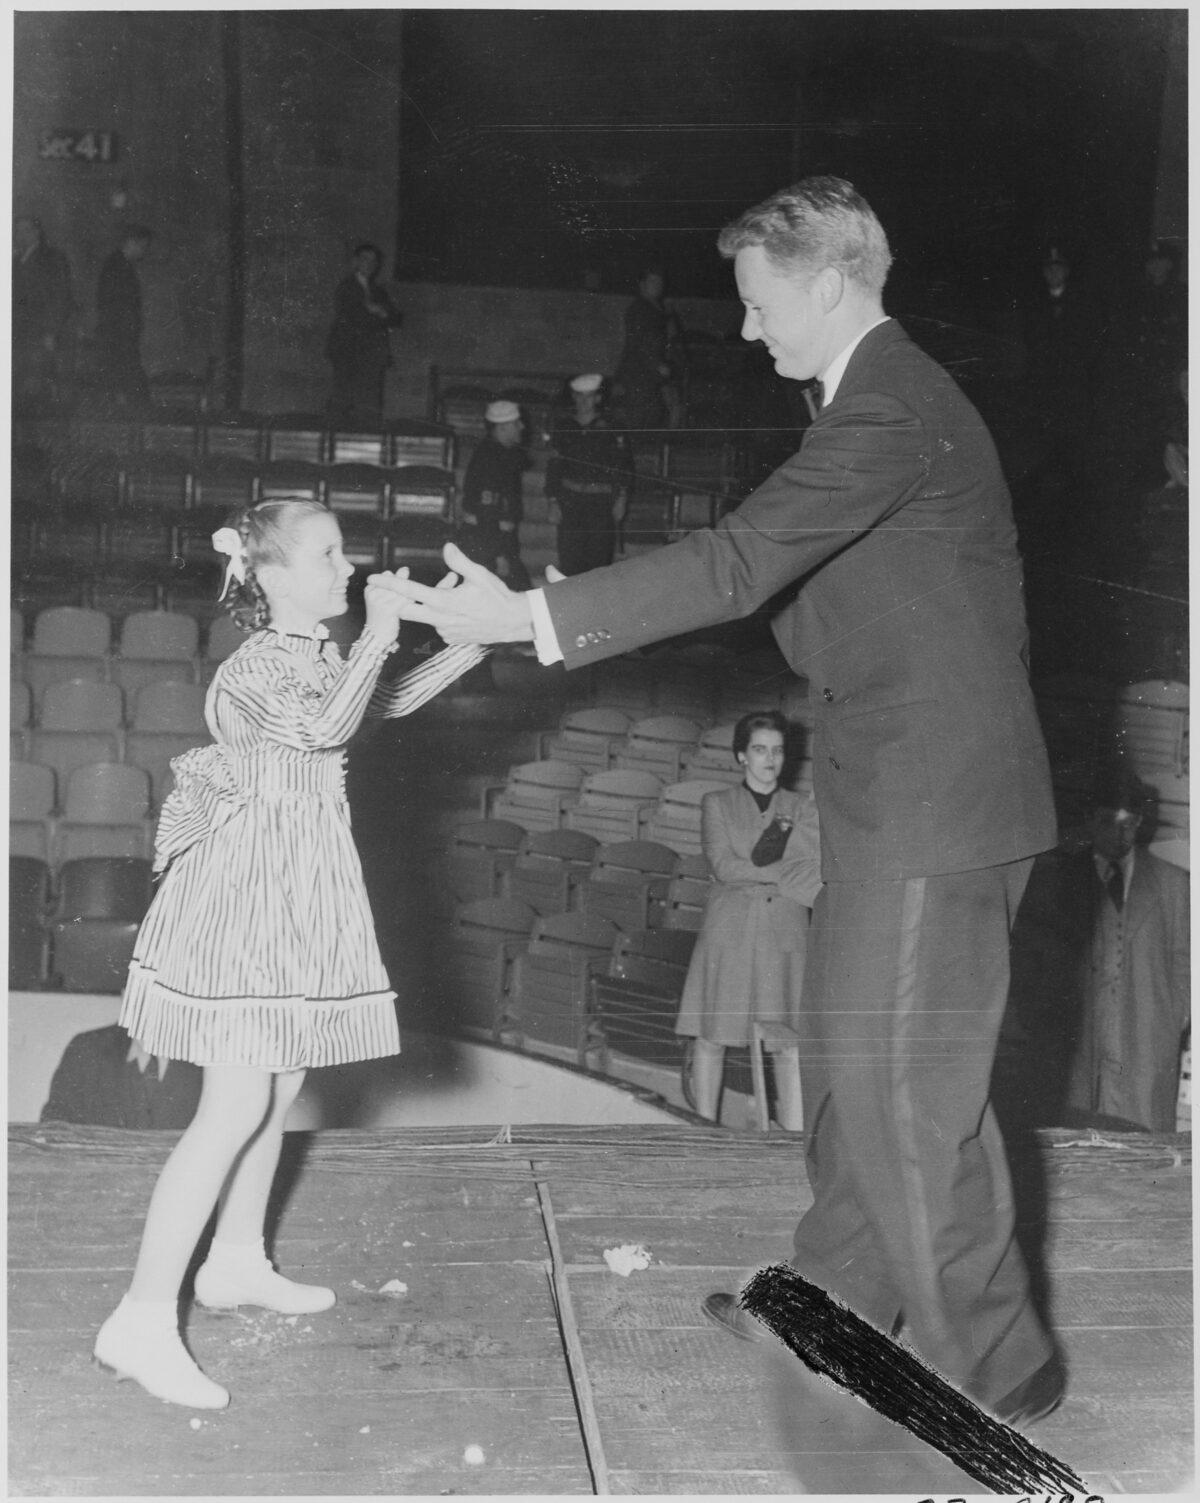 Photograph of actor Van Johnson dancing with Margaret O'Brien at a Roosevelt Birthday Ball event in 1946. (Public Domain)